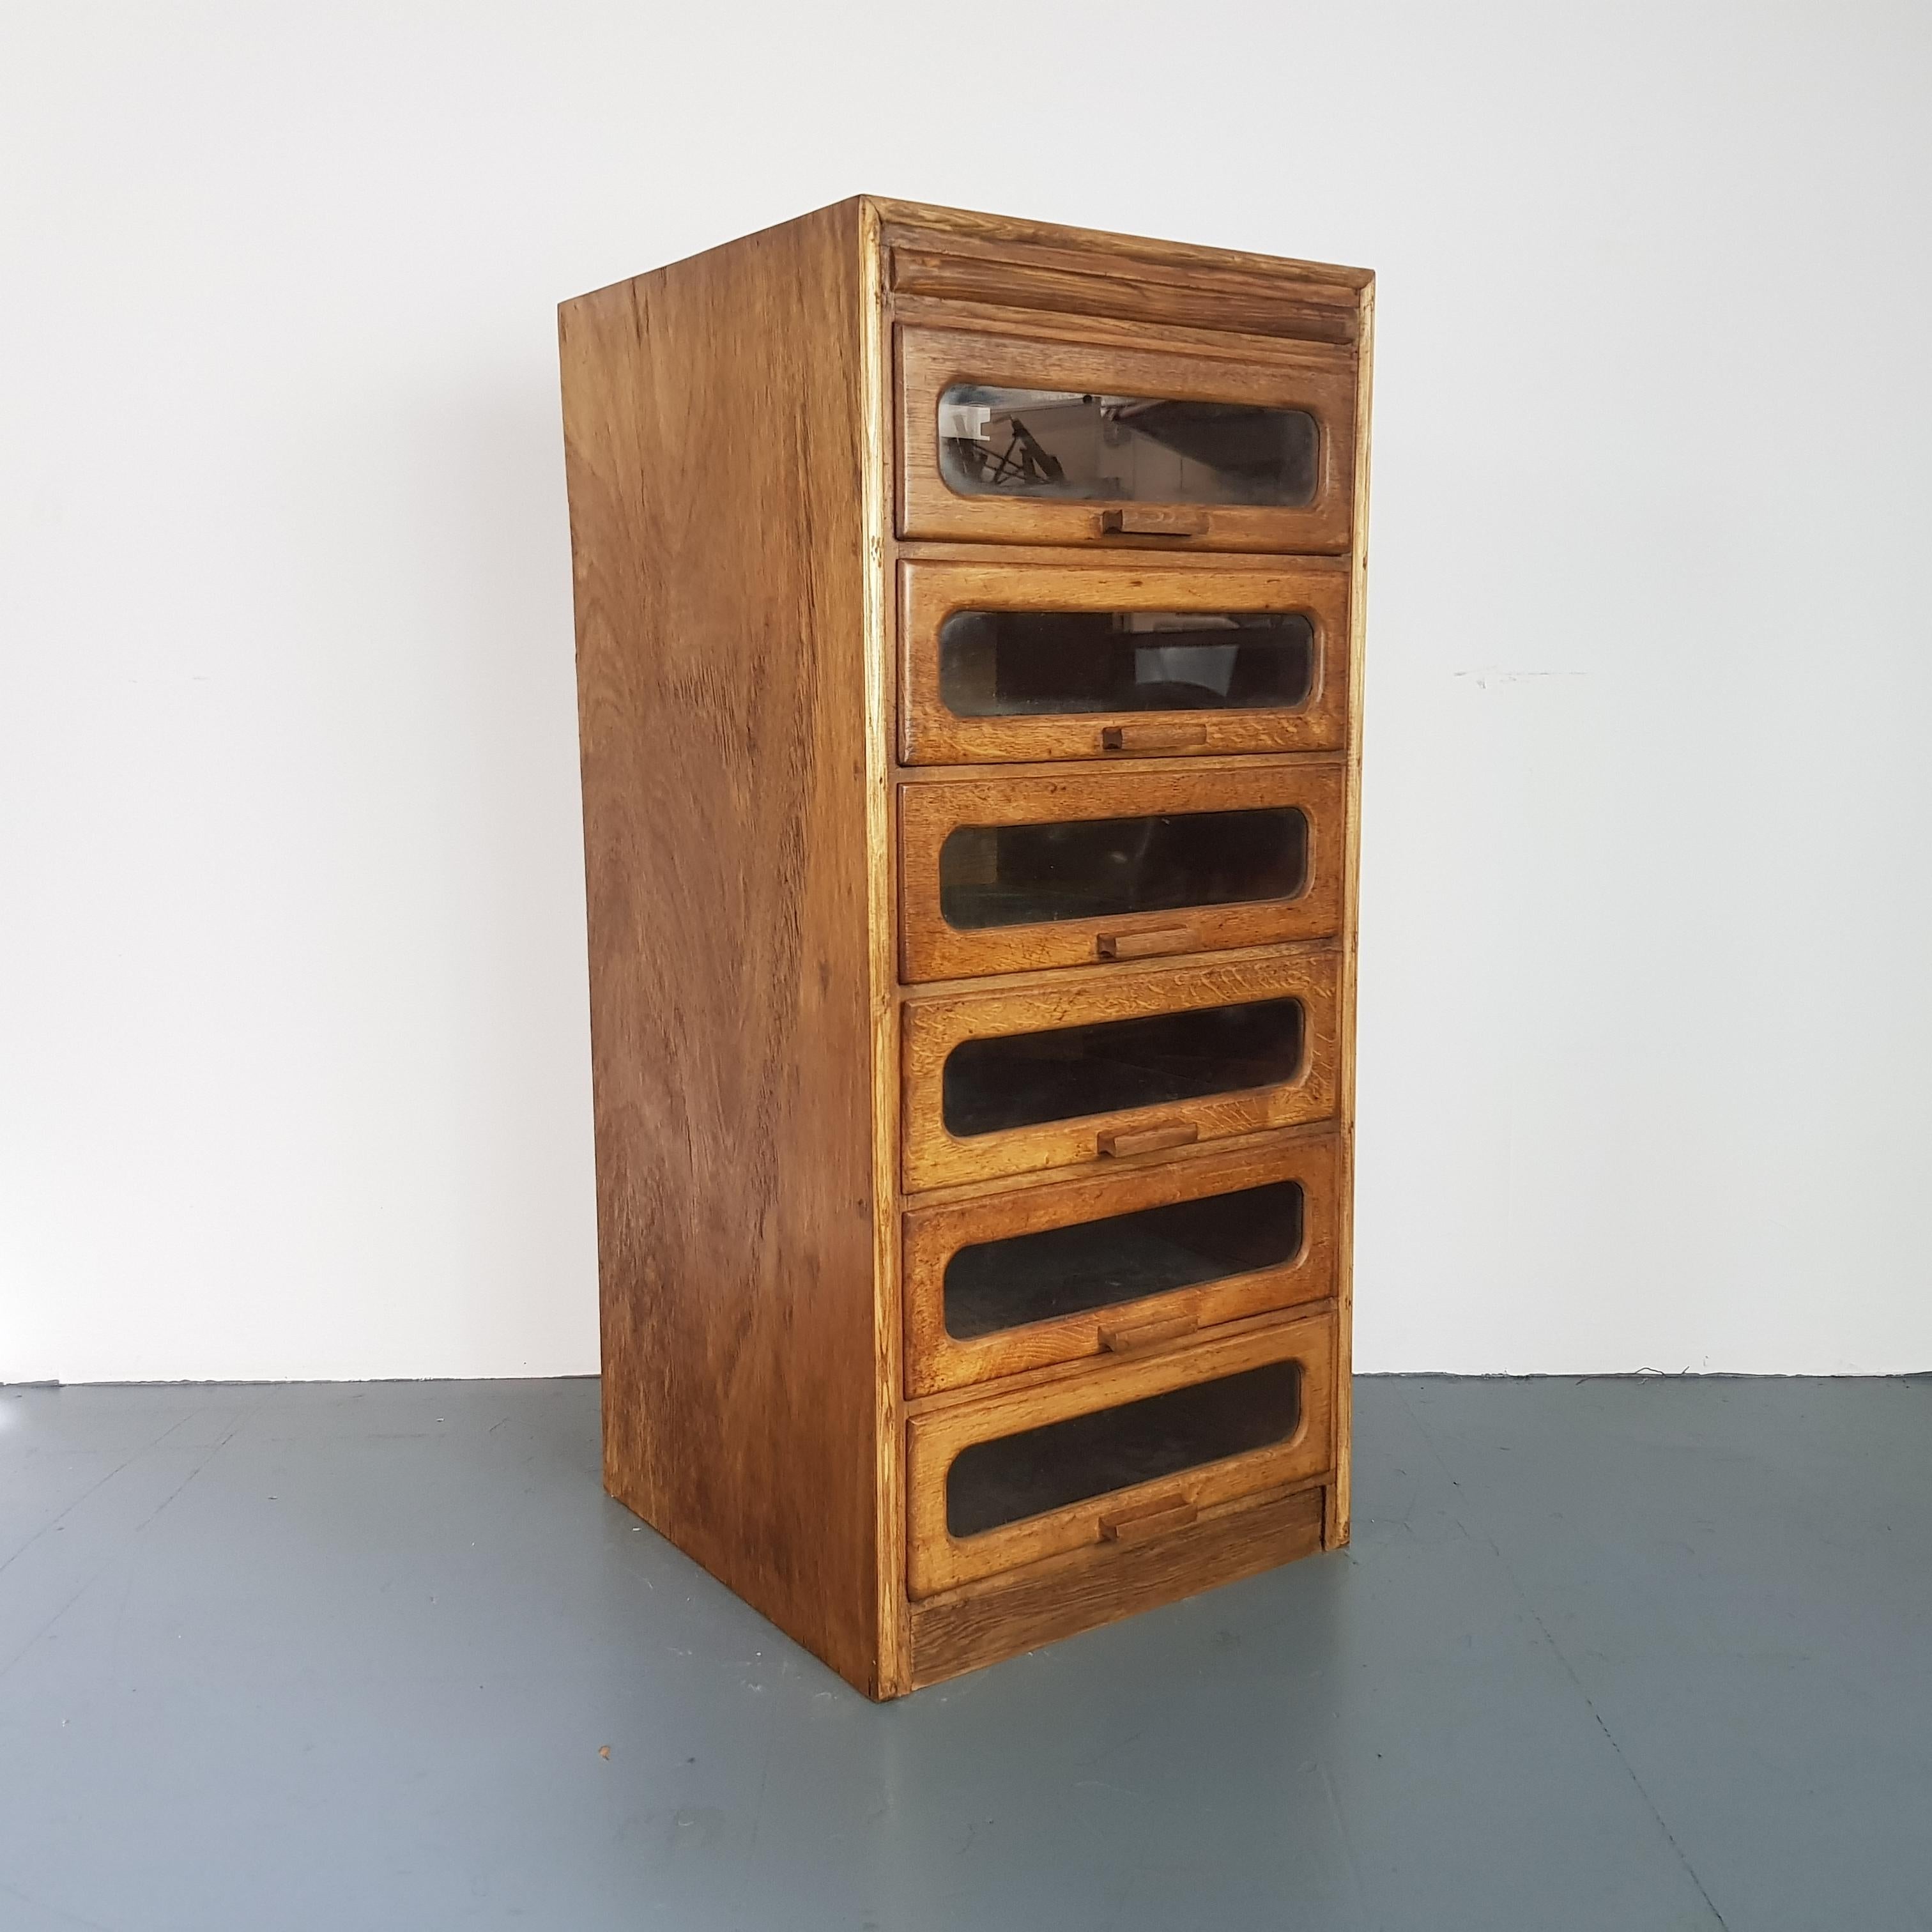 6-drawer single column haberdashery shop cabinet. 

It has 6 glass fronted drawers, all with original wooden handles.

Approximate dimensions:

Height: 107cm

Width: 49cm

Depth: 50cm

Drawers: 40cm x 45cm x 12cm.

 

Overall, in